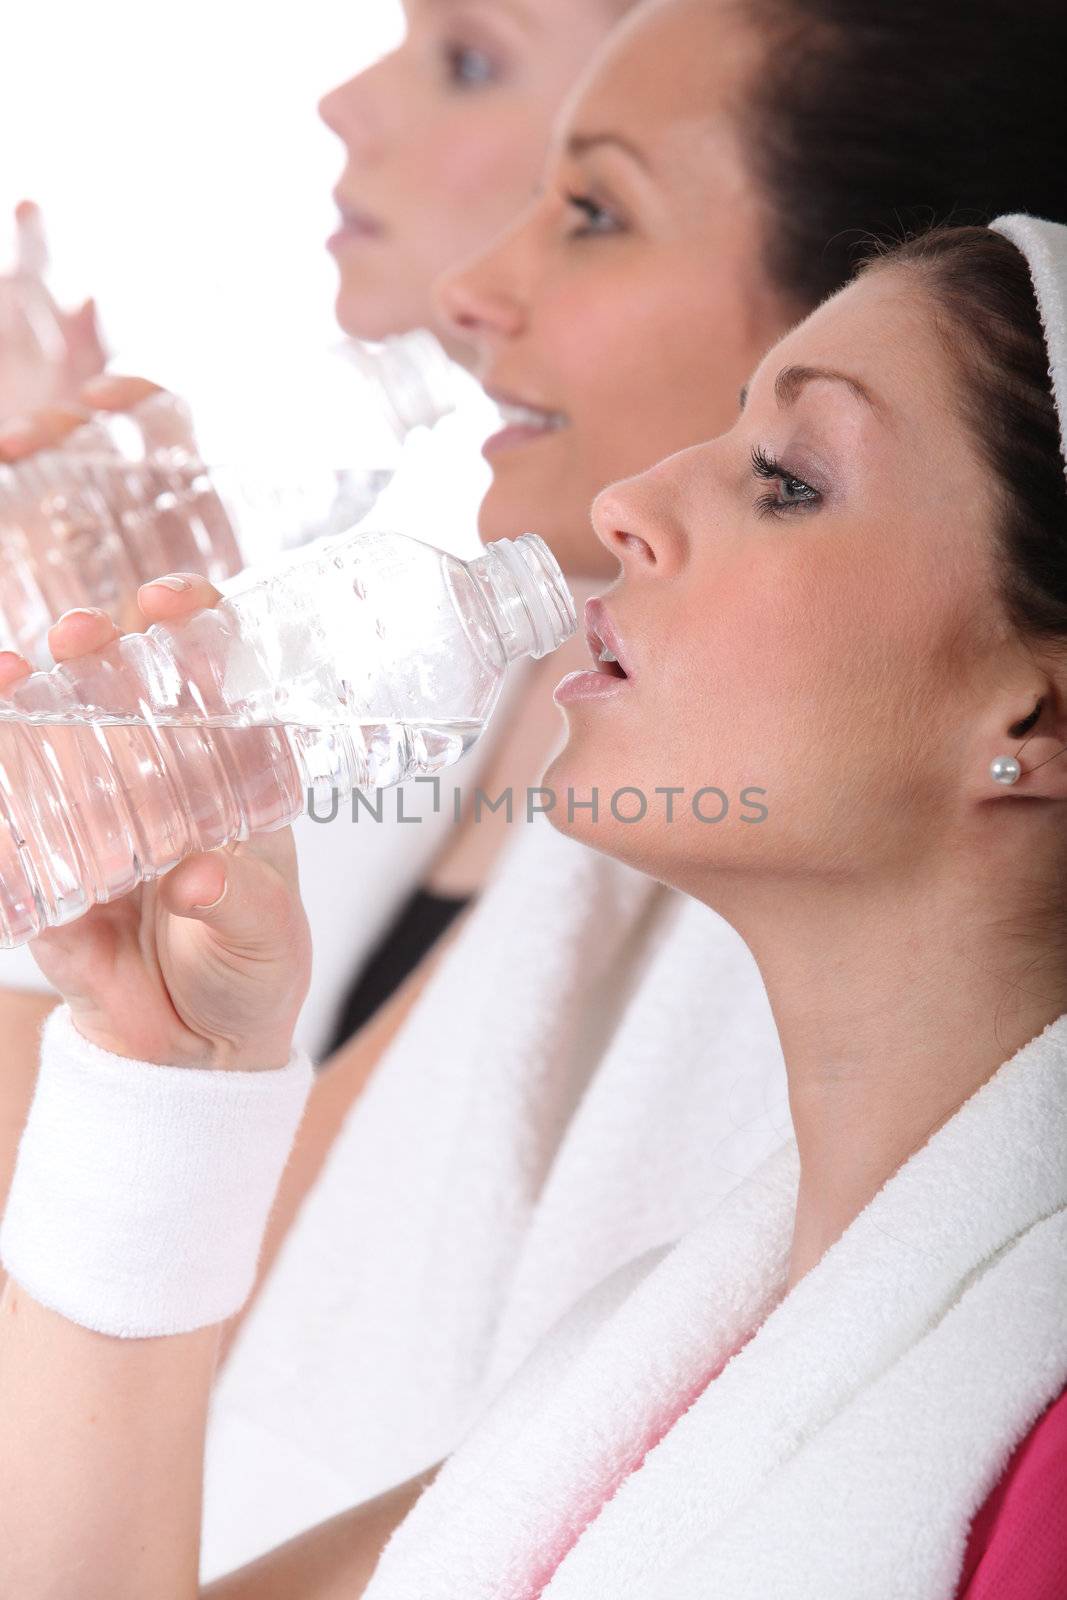 Women in gym drinking from water bottles by phovoir